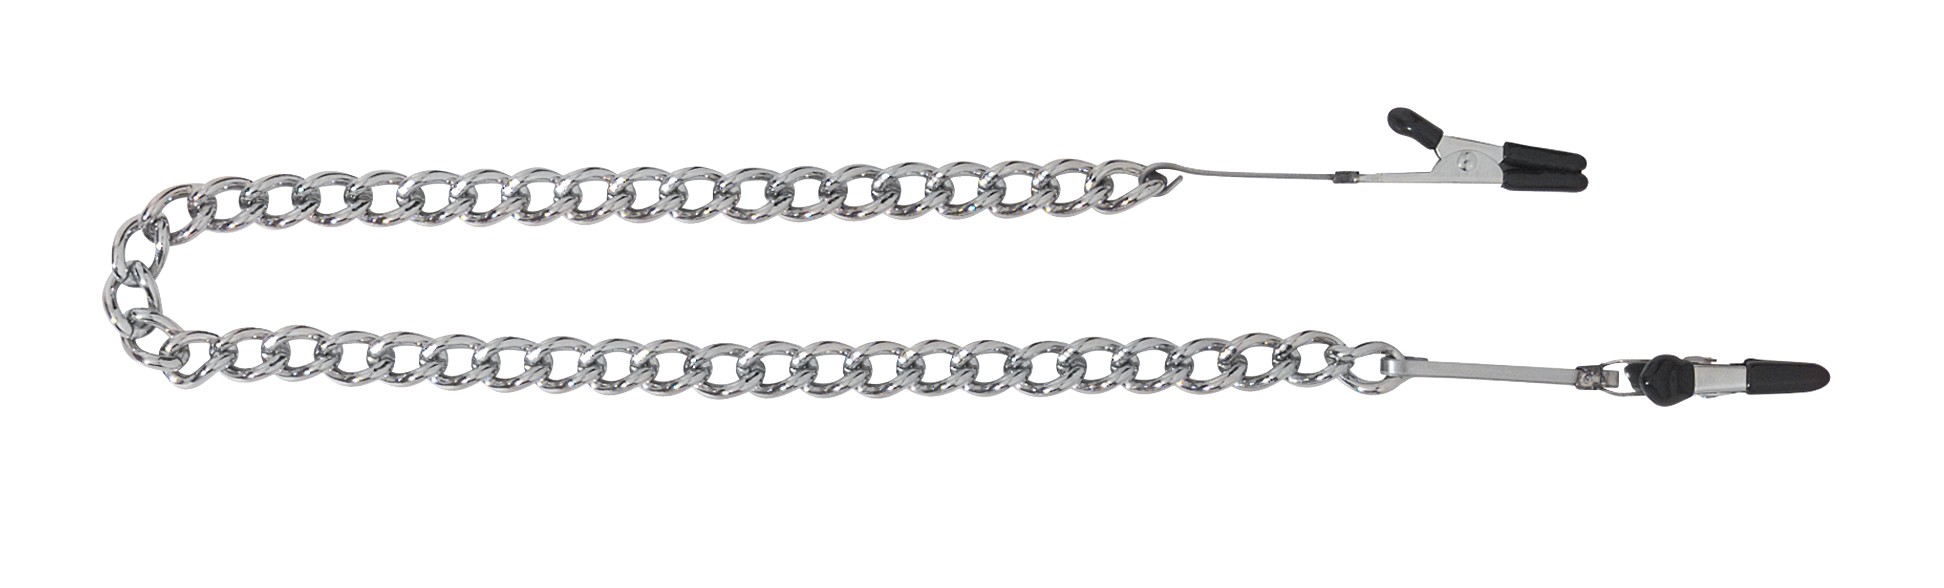 Endurance Teaser Tip Clamps - Link Chain